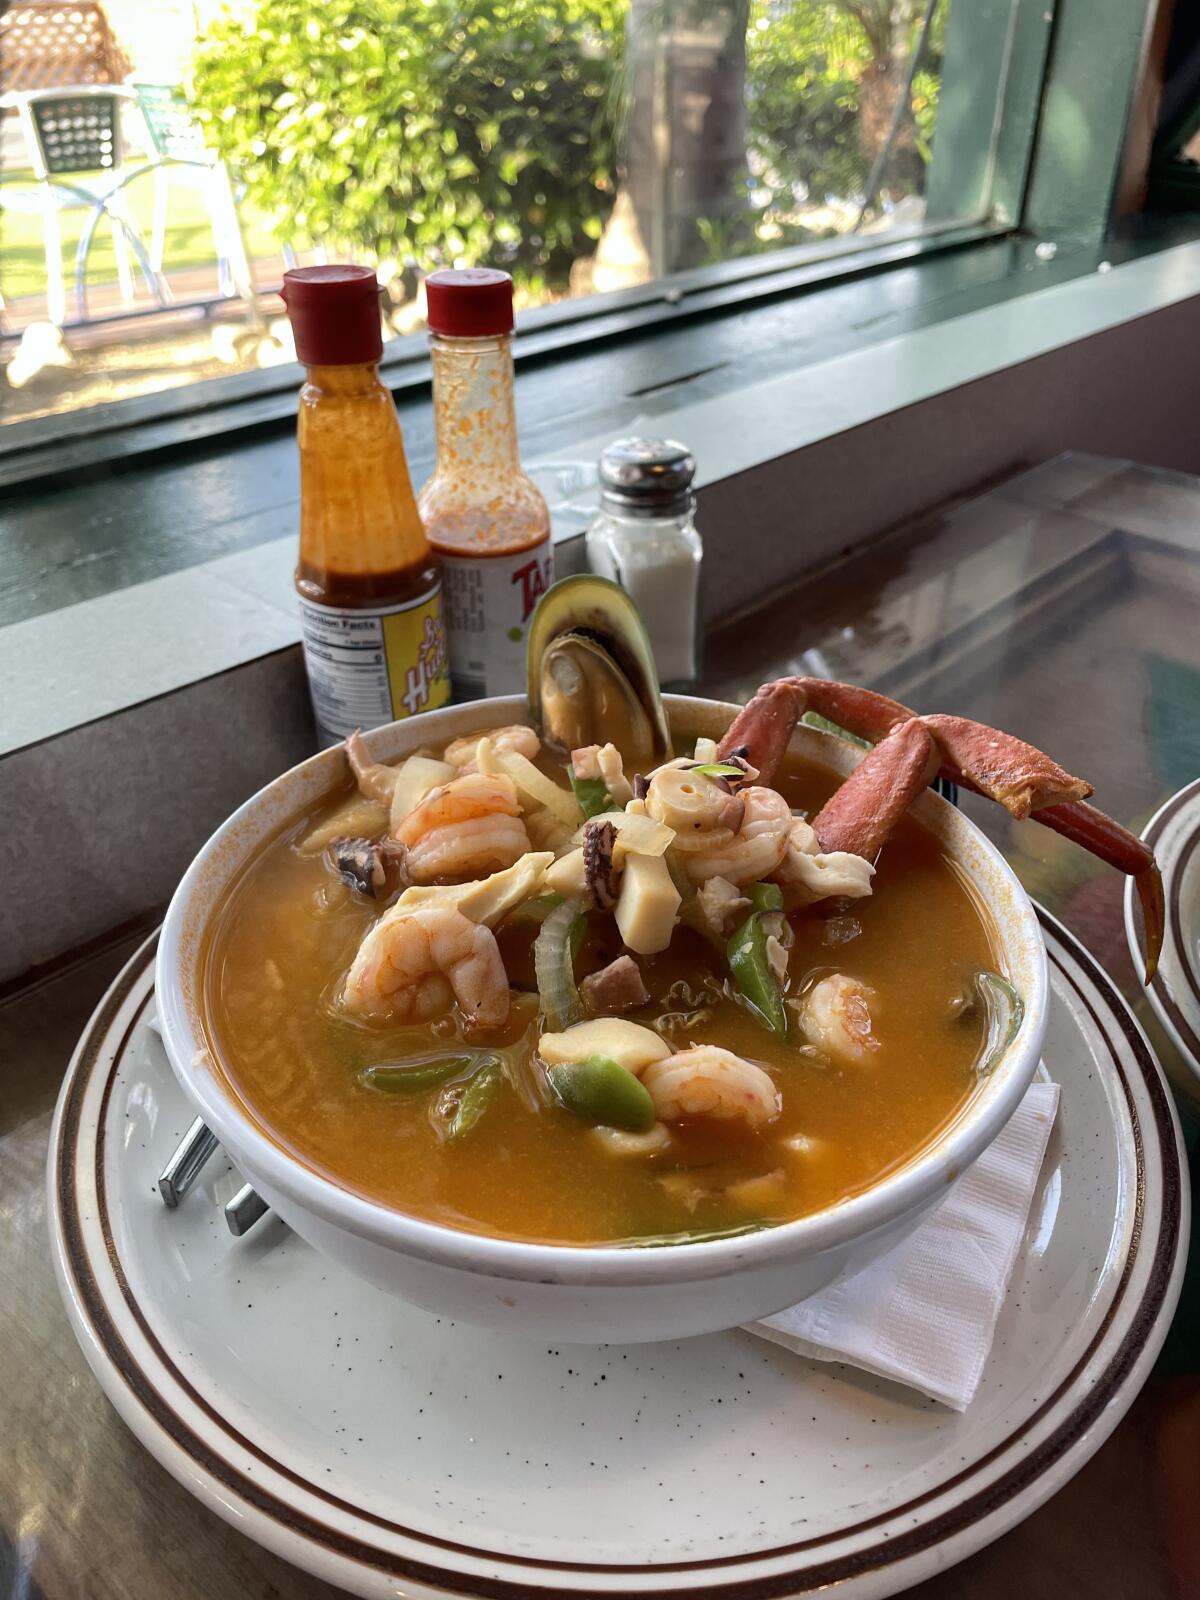 Ostioneria Bahia’s version of the soup, caldo siete mares, has seven kinds of seafood.